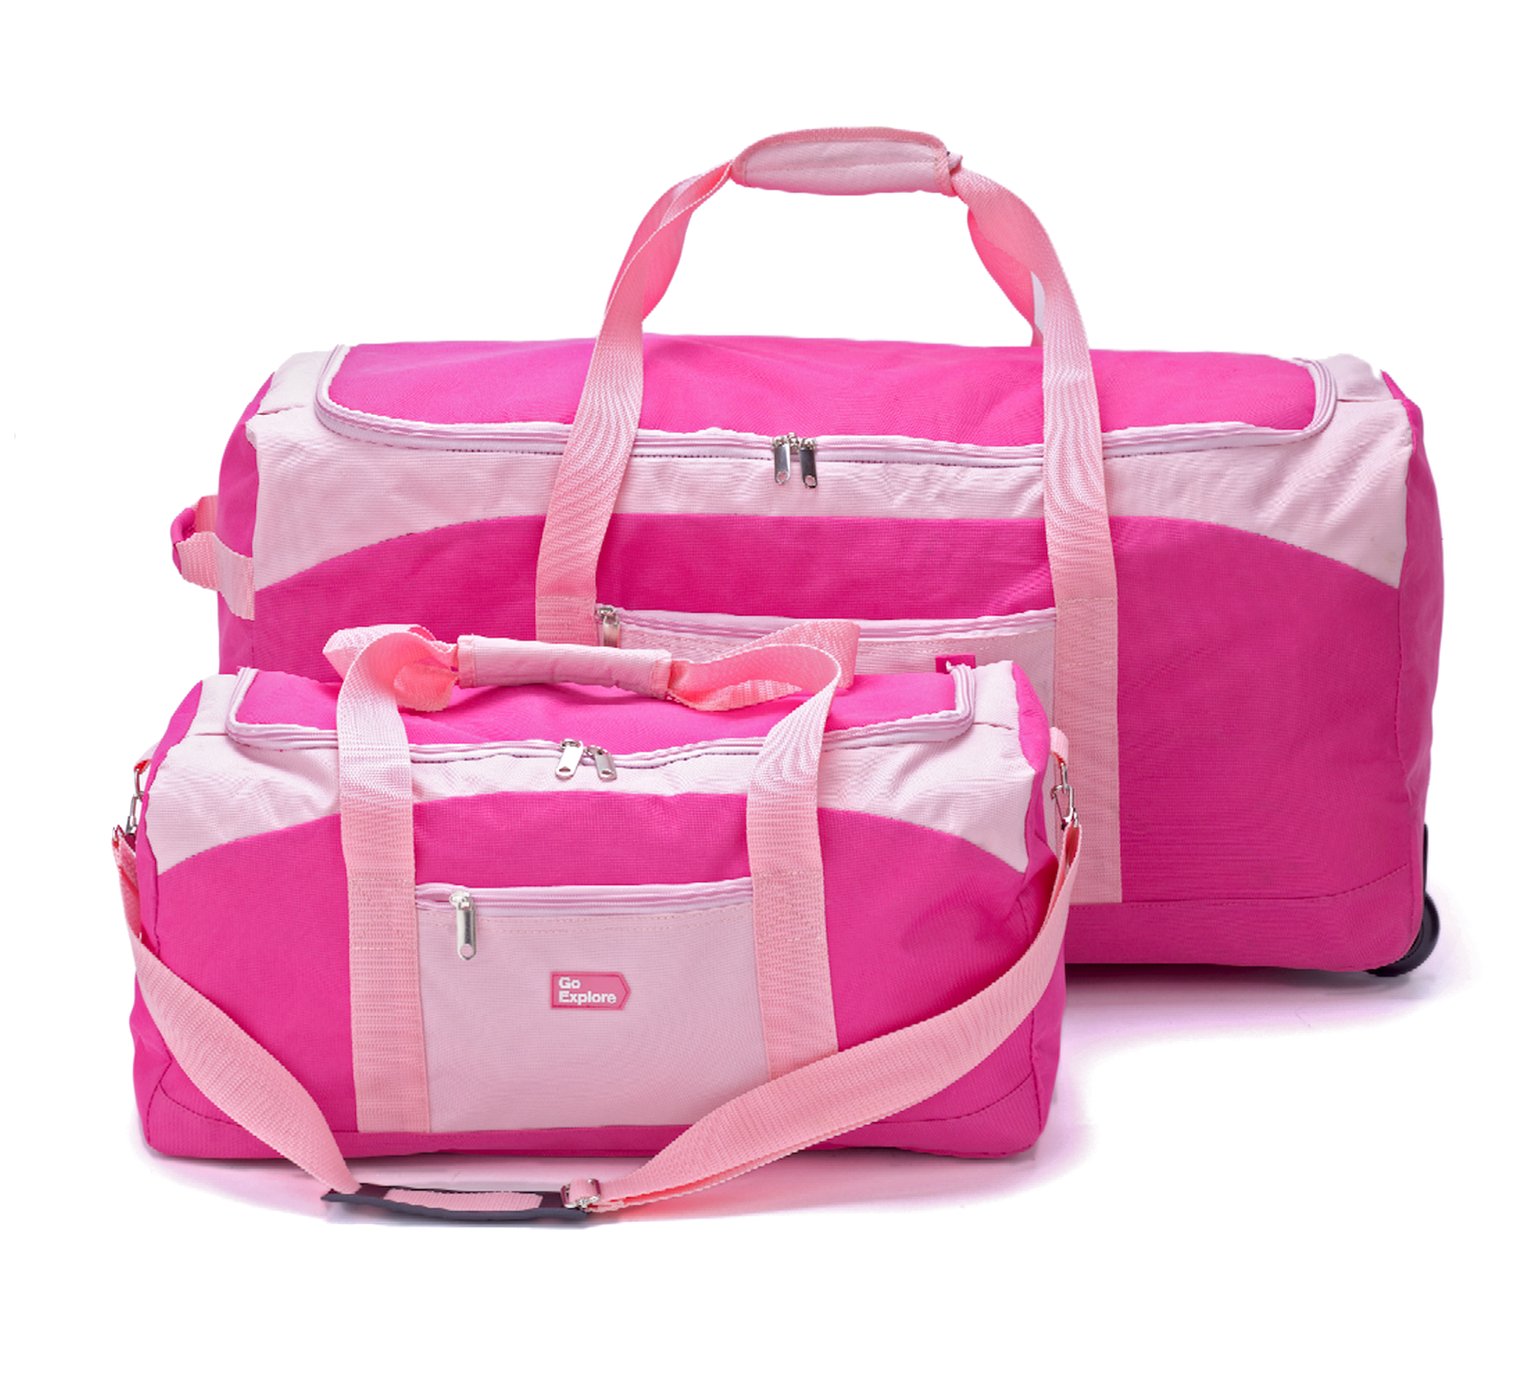 Go Explore Extra Large Pink Wheeled Holdall and Holdall Set Review